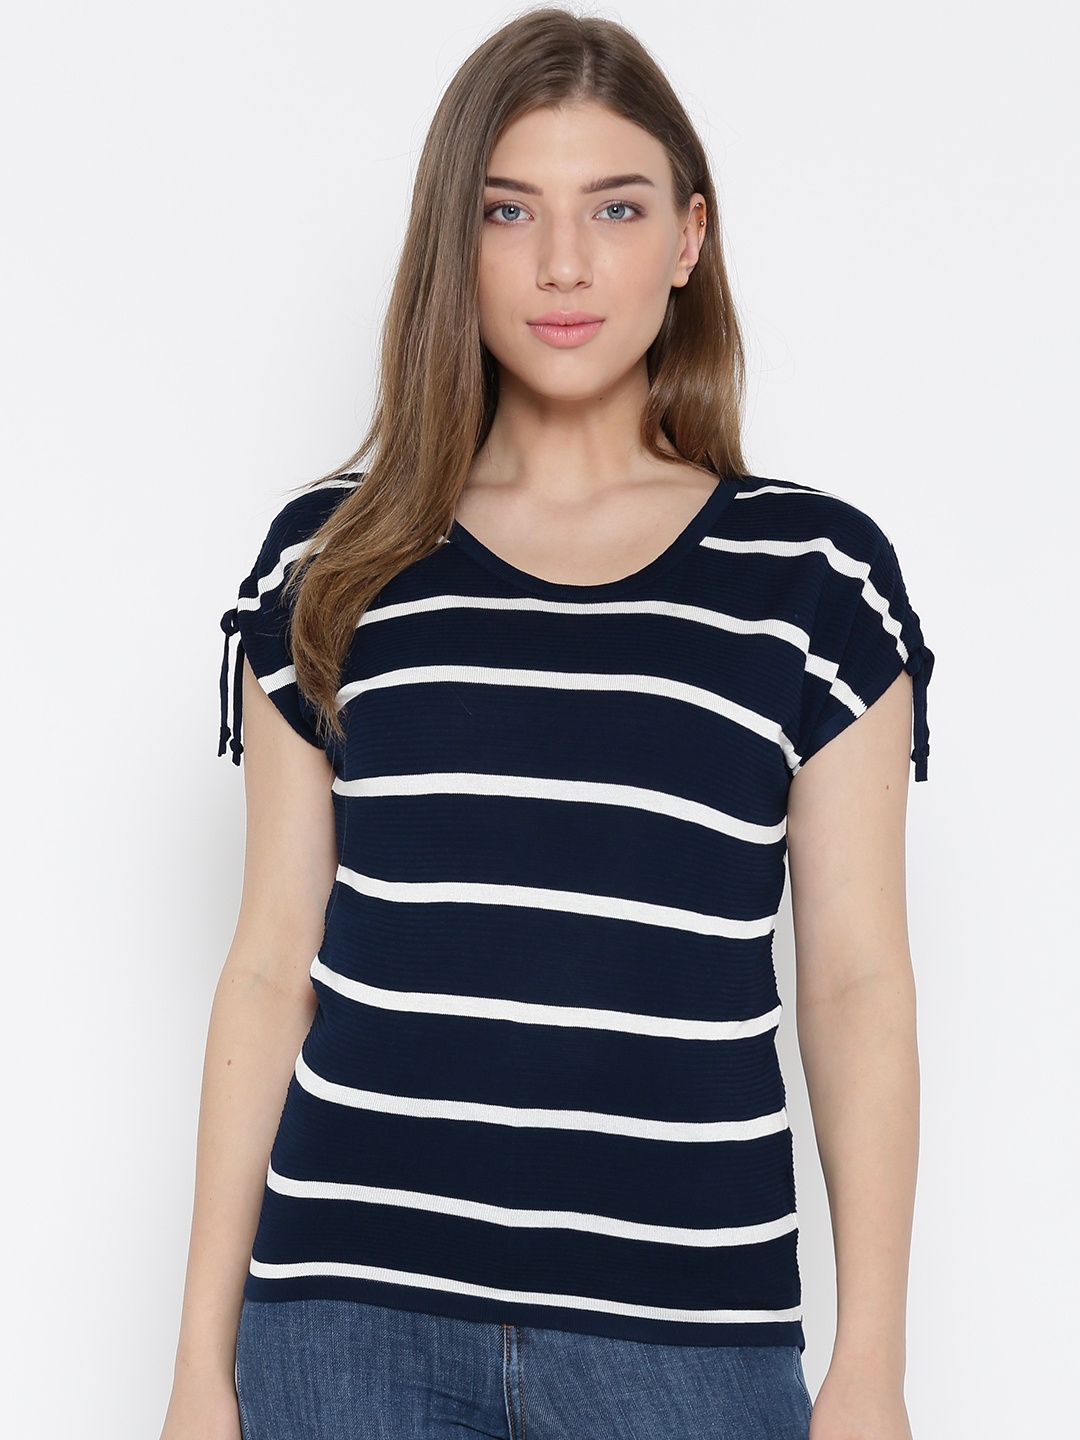 Buy Wills Lifestyle Women Navy & White Striped Top - Tops for Women ...